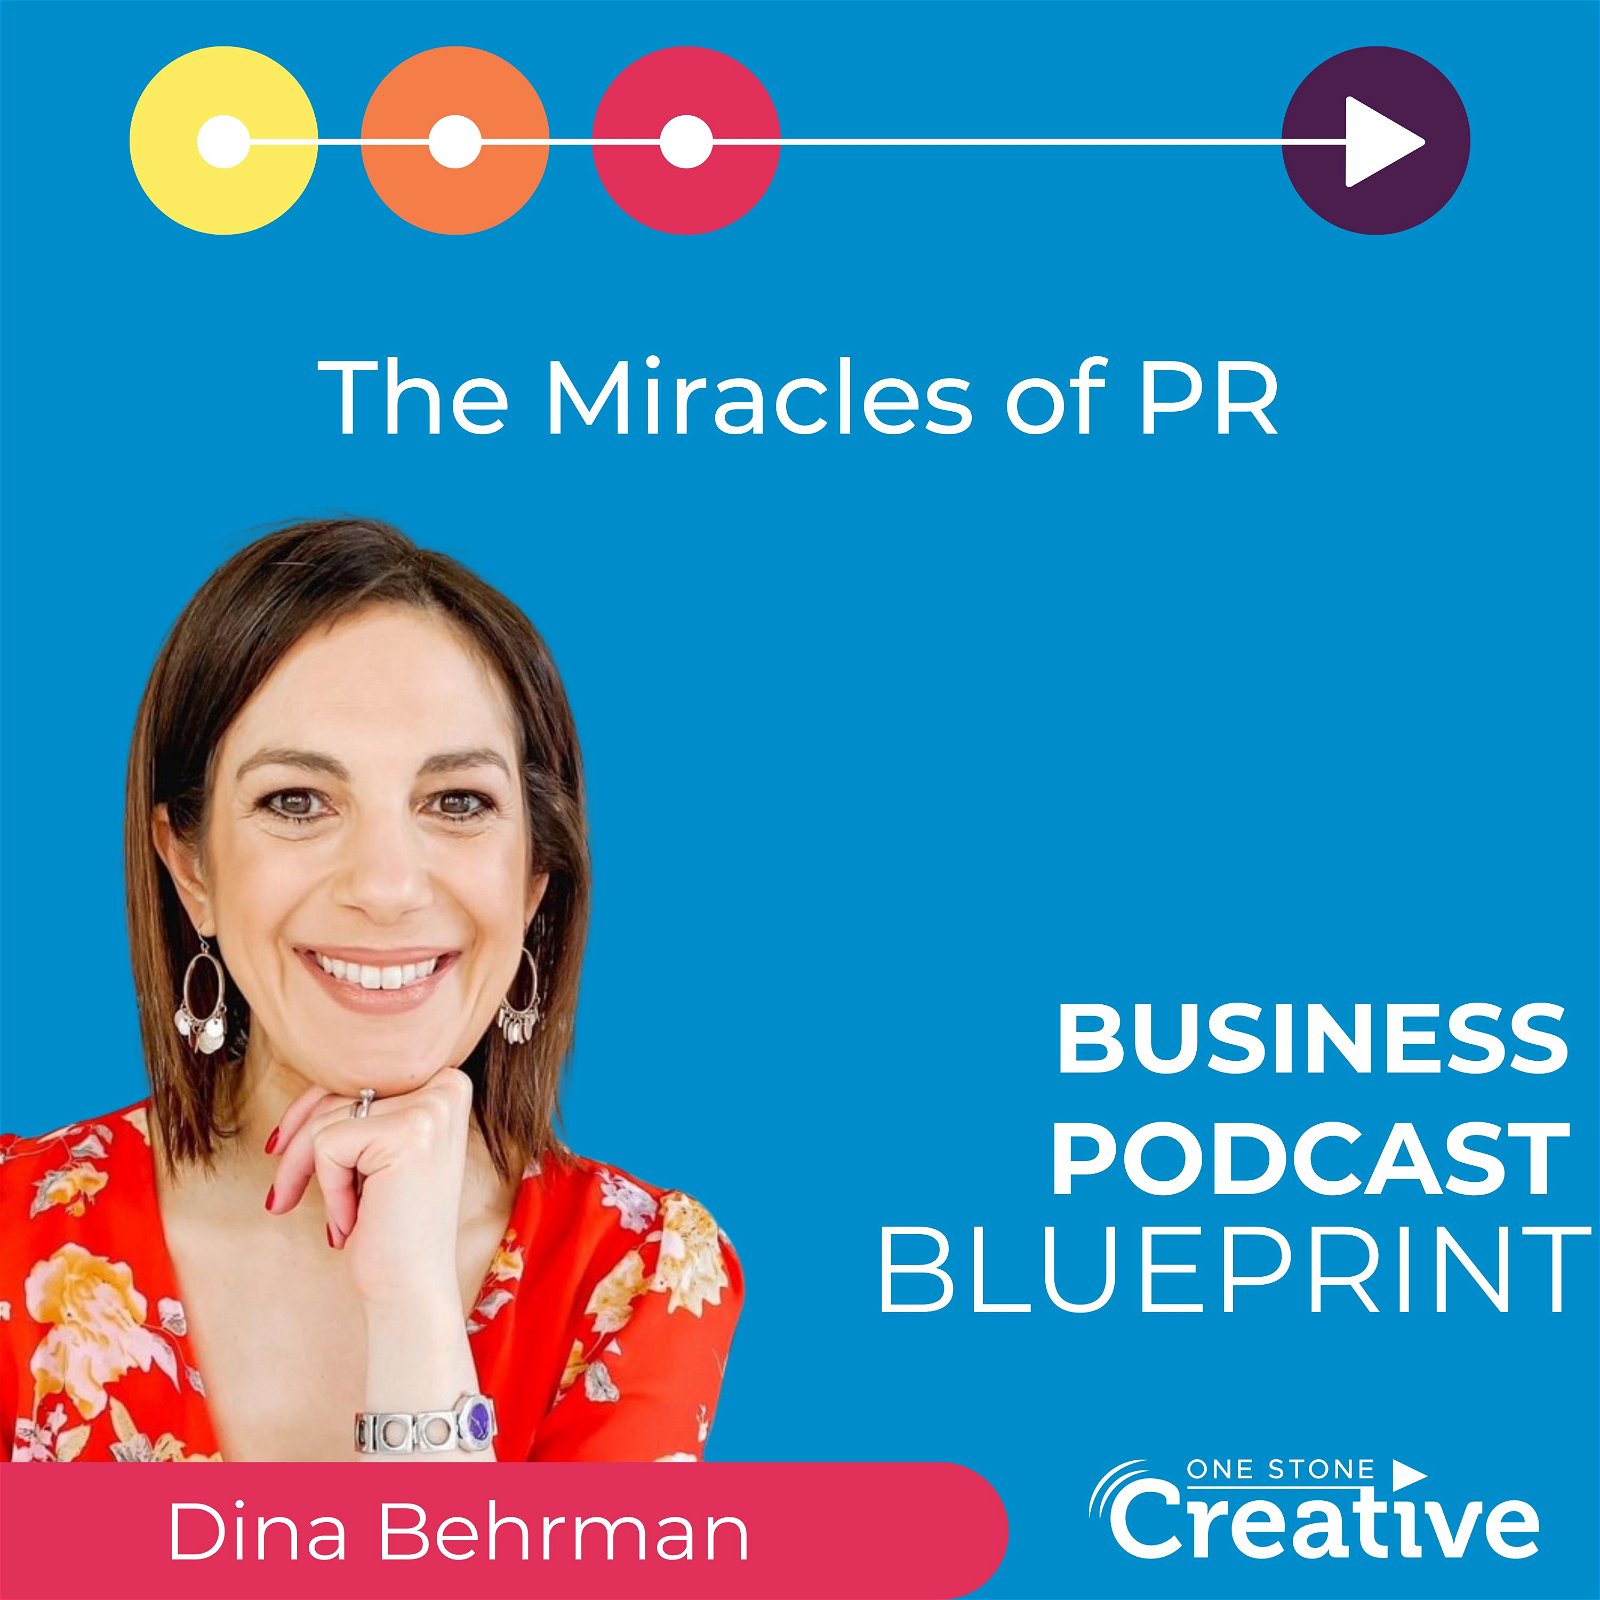 The Miracles of PR with Dina Behrman